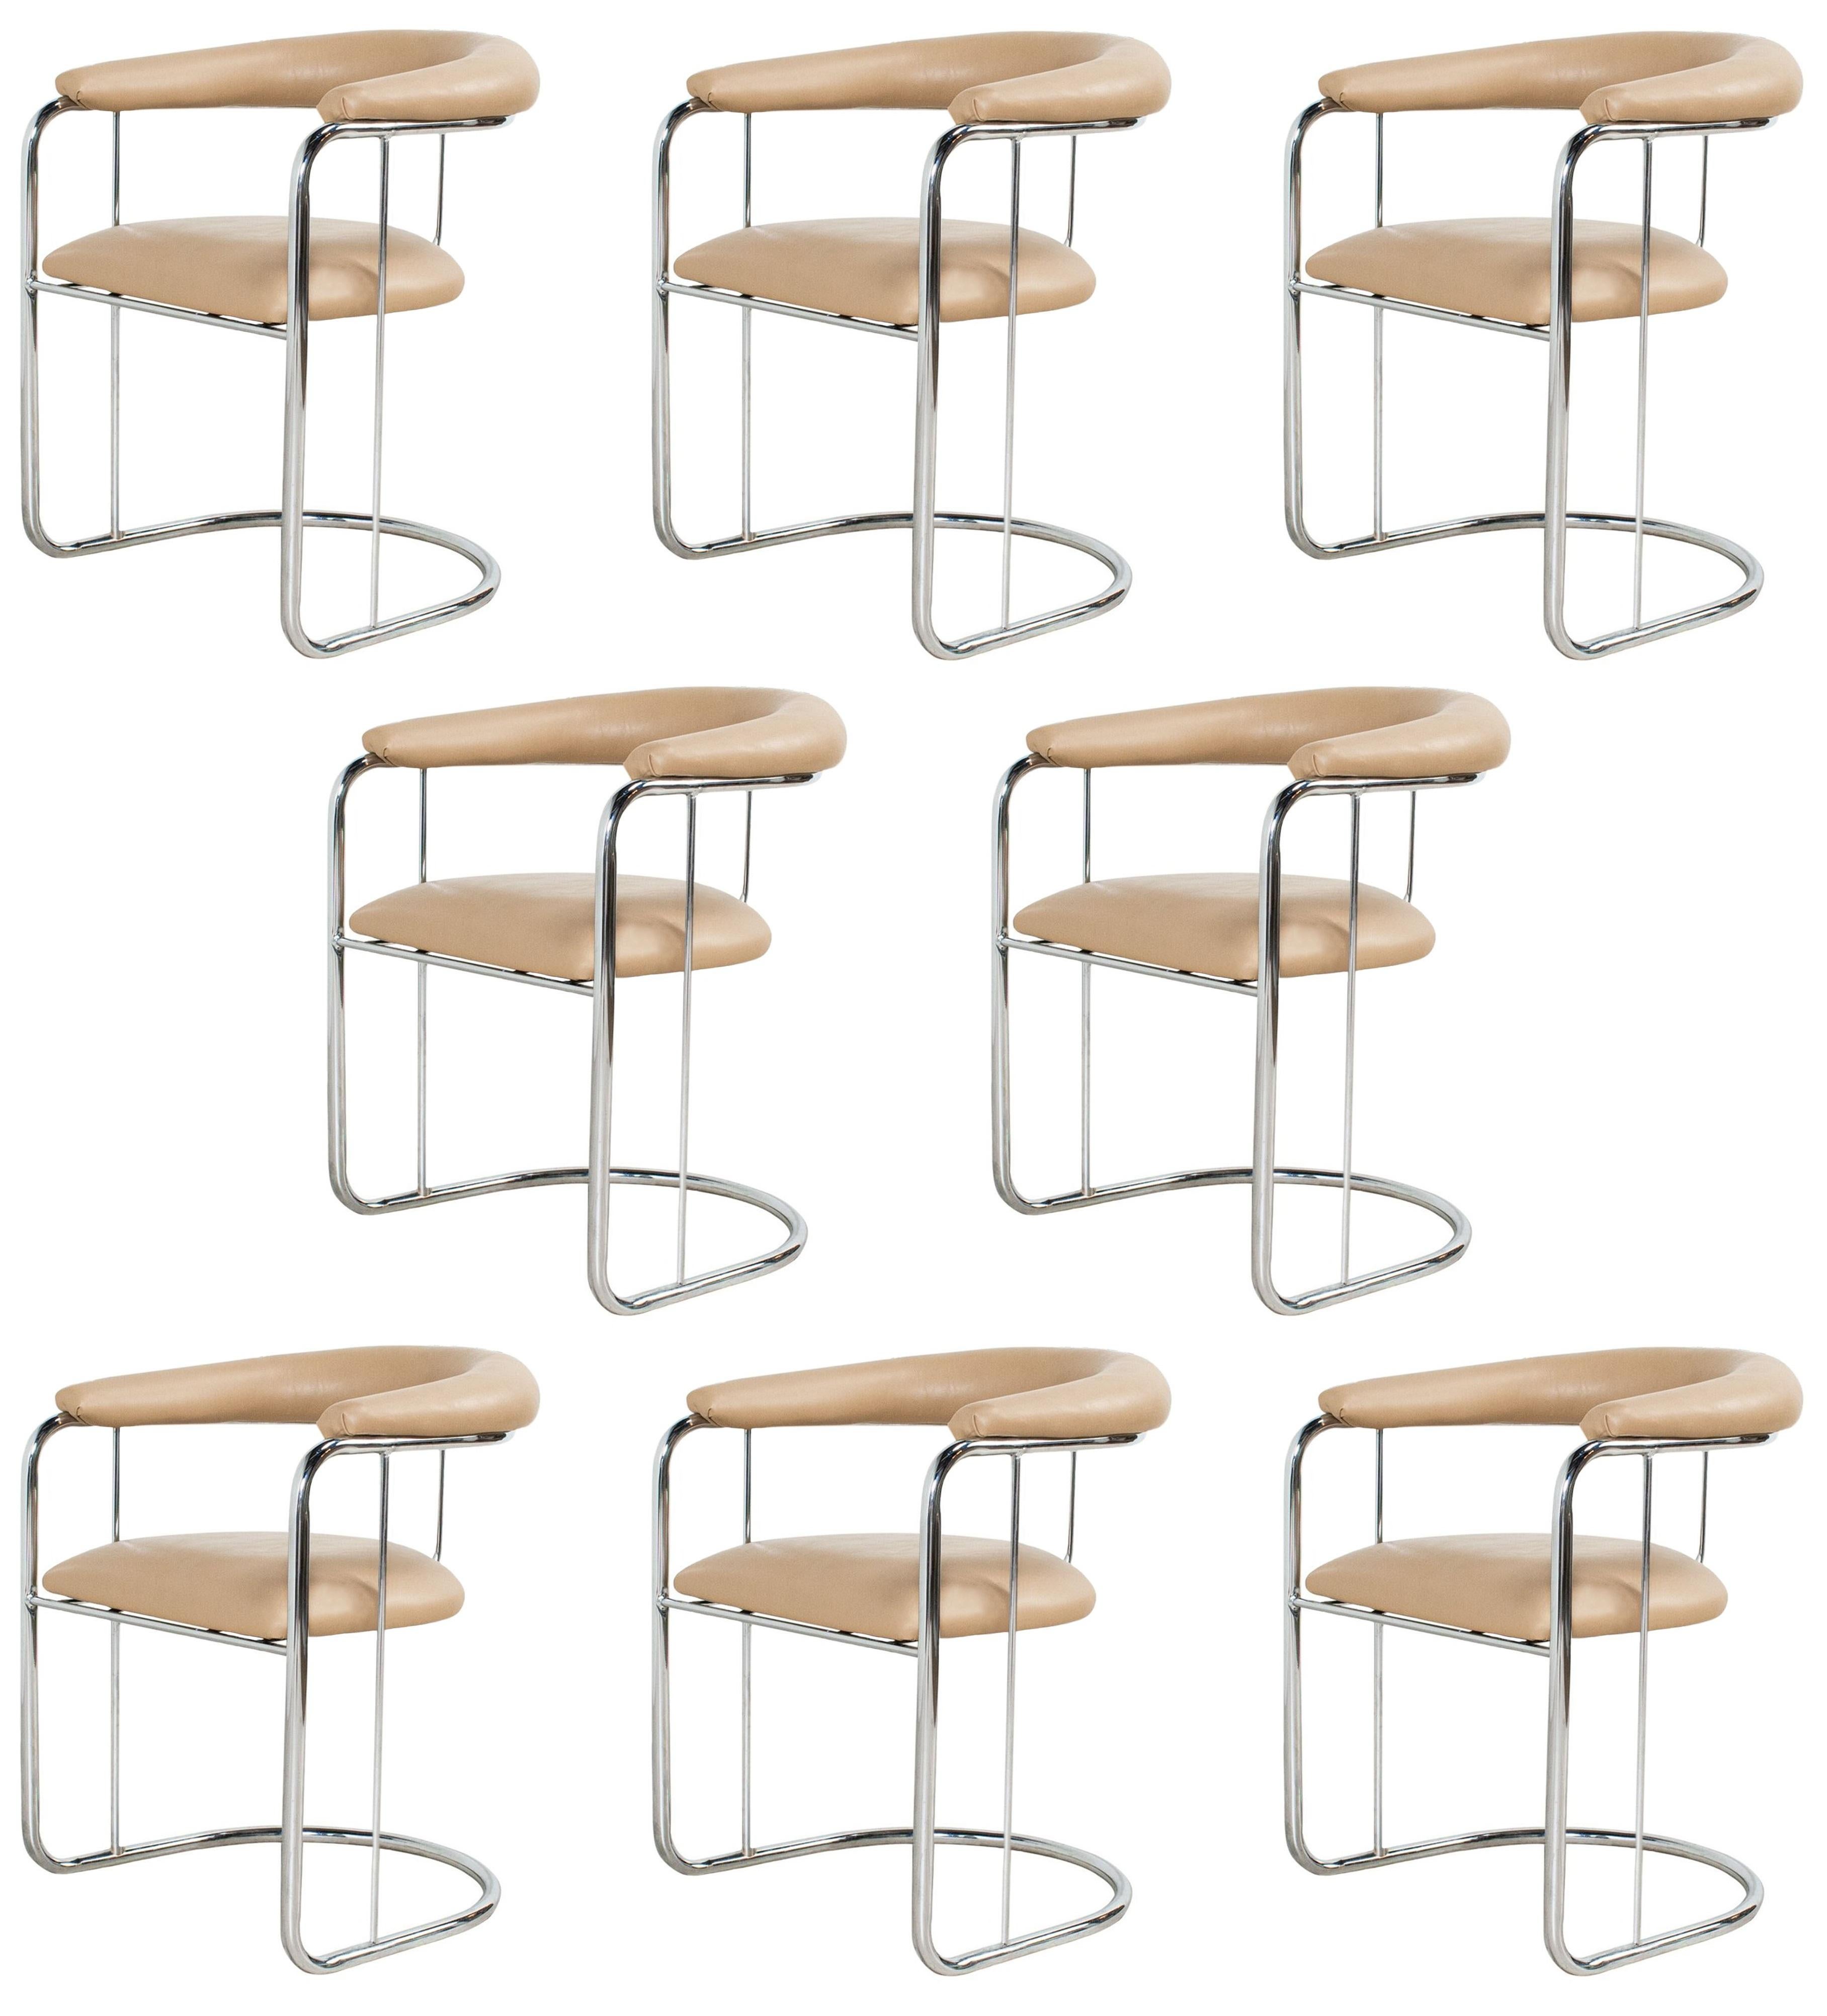 Eight Sleek Chrome Dining Chairs by Anton Lorenz for Thonet